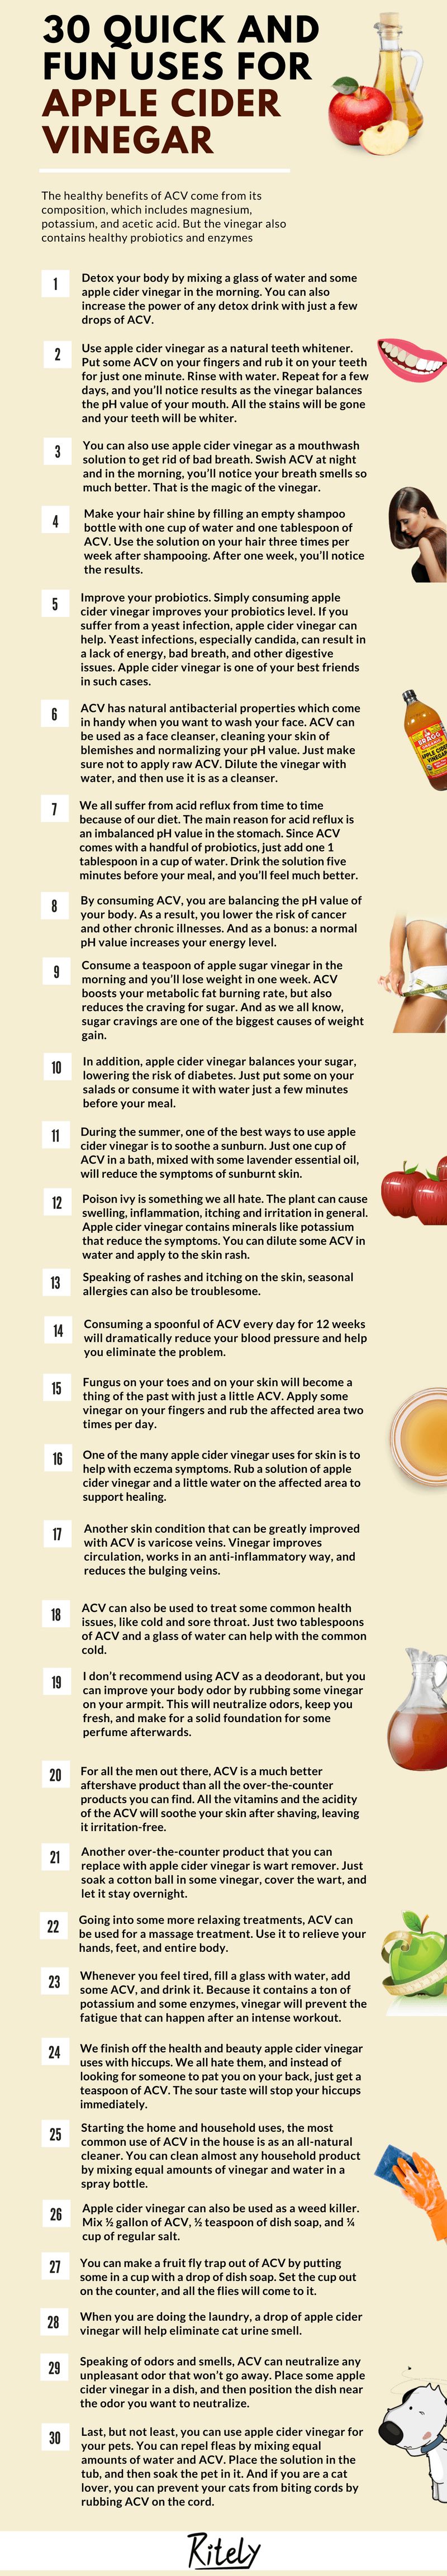 30 Quick and Fun Uses for Apple Cider Vinegar